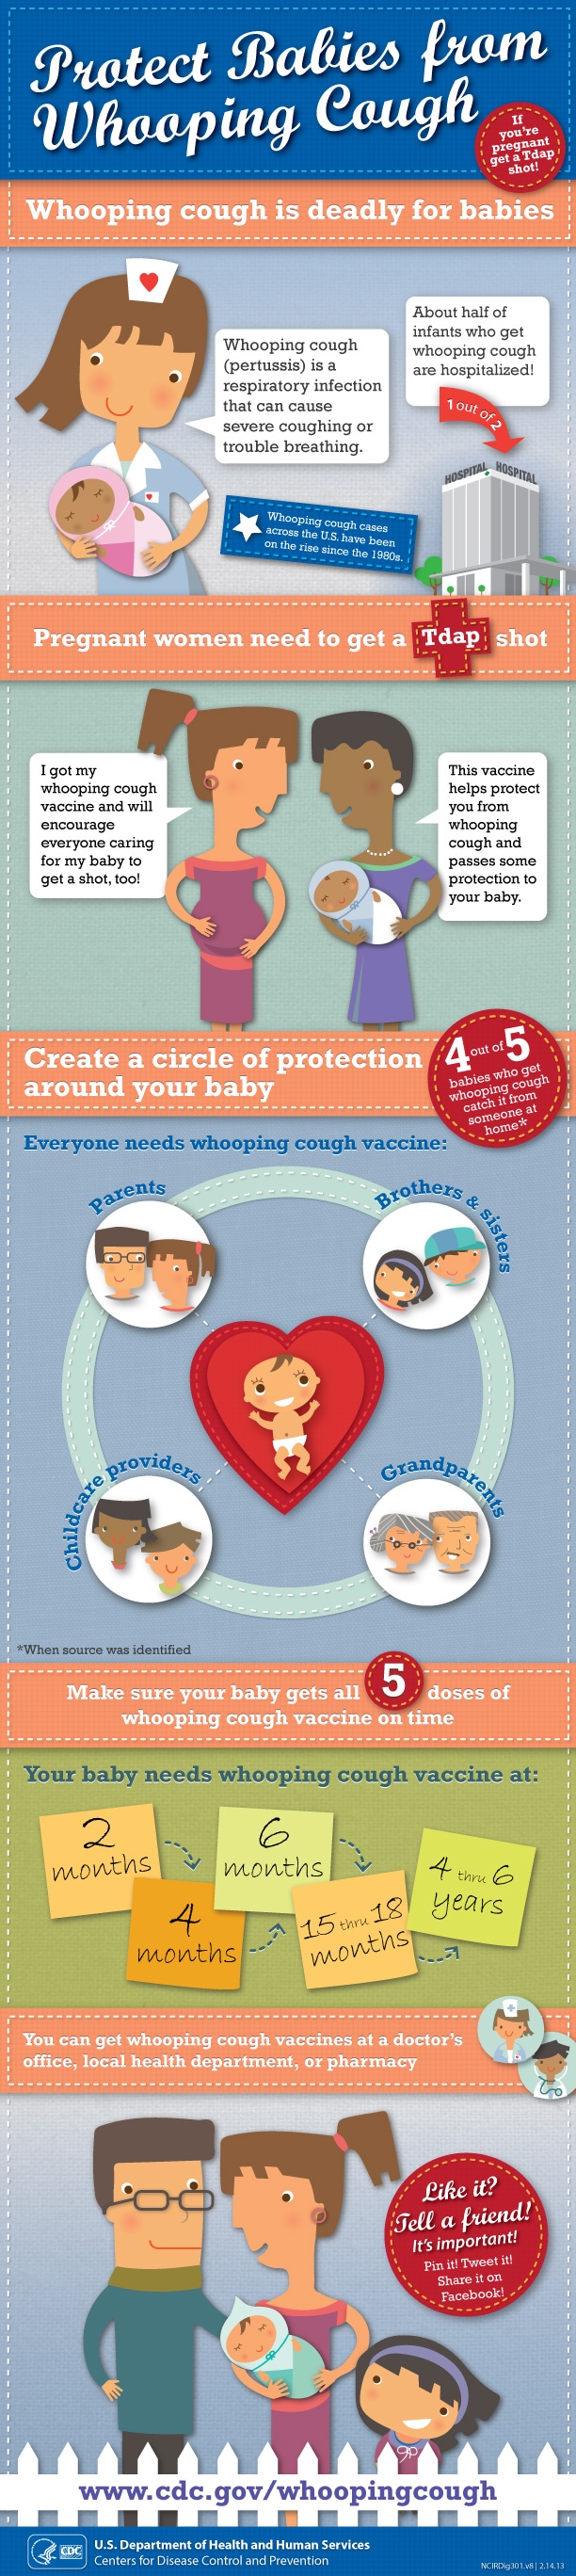 protect babies from whooping cough infographic as discussed in text